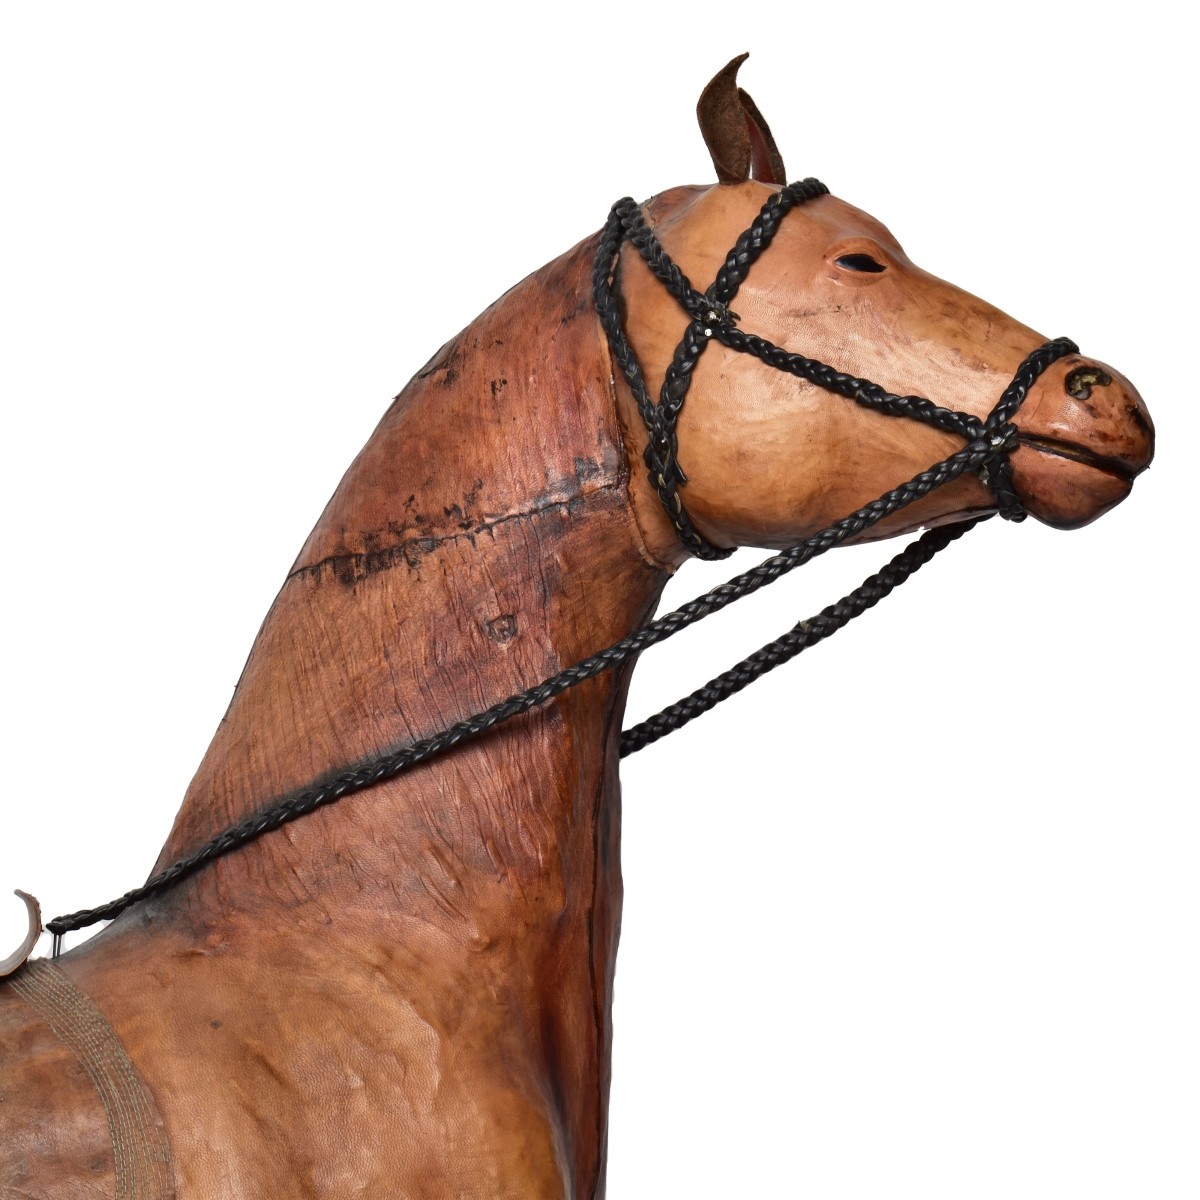 Abercrombie & Fitch Leather Horse Sculpture